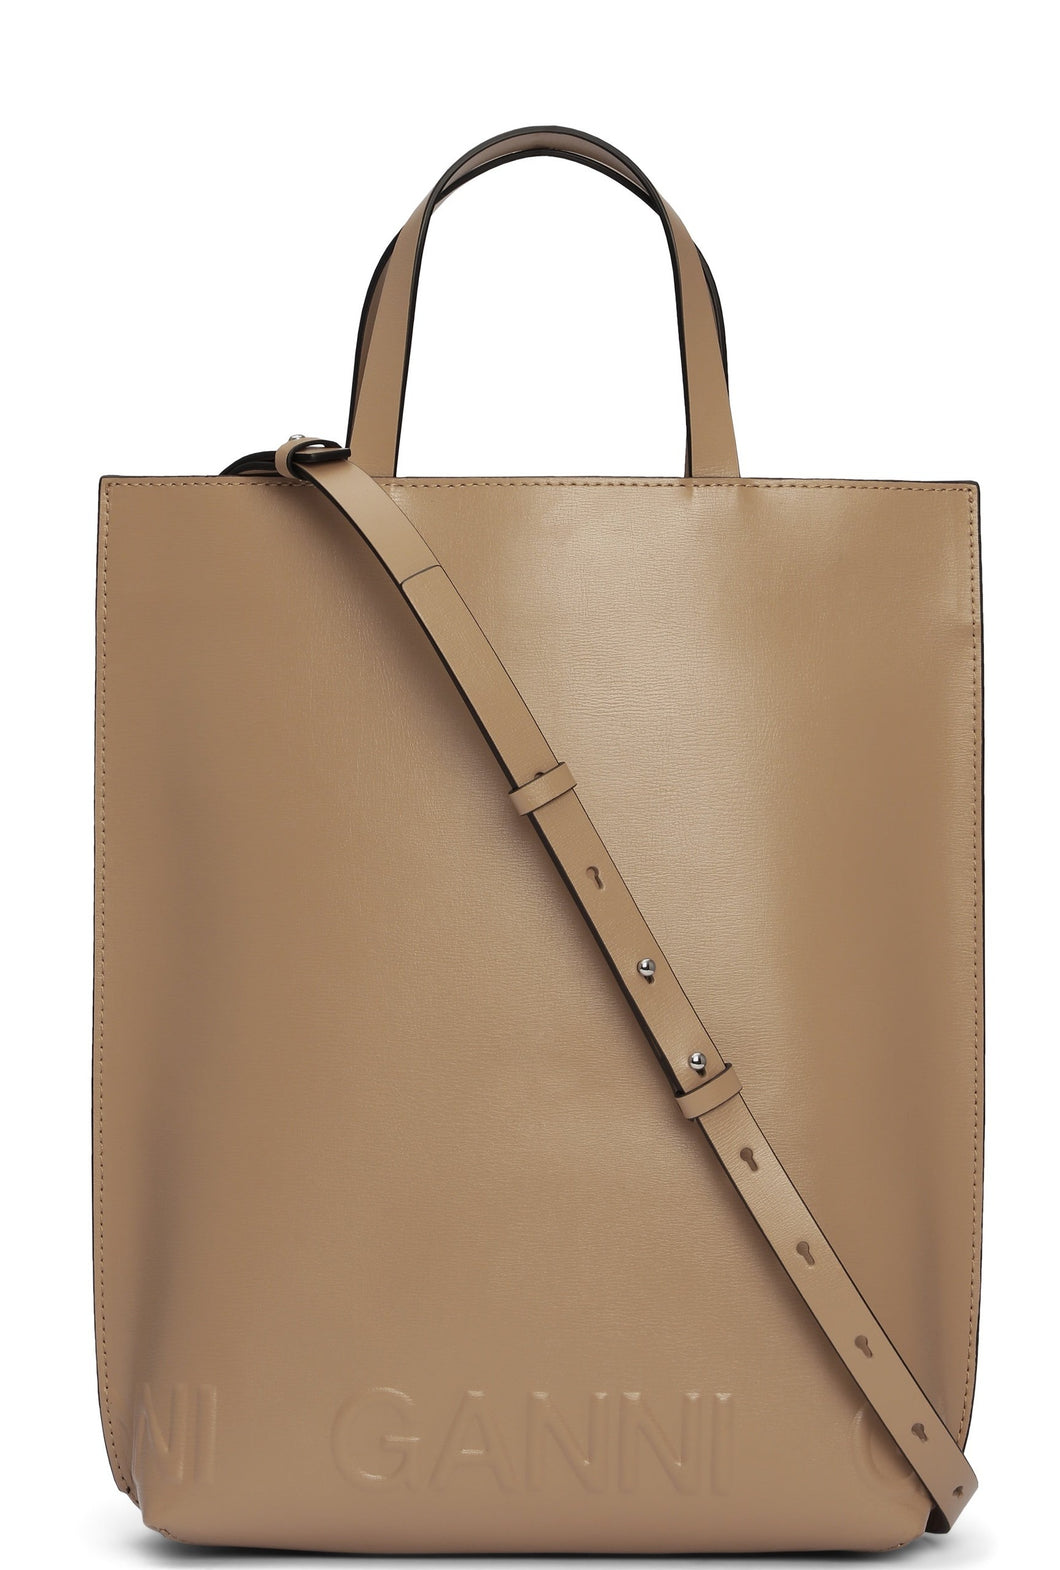 MEDIUM TOTE BANNER RECYCLED LEATHER TANNIN